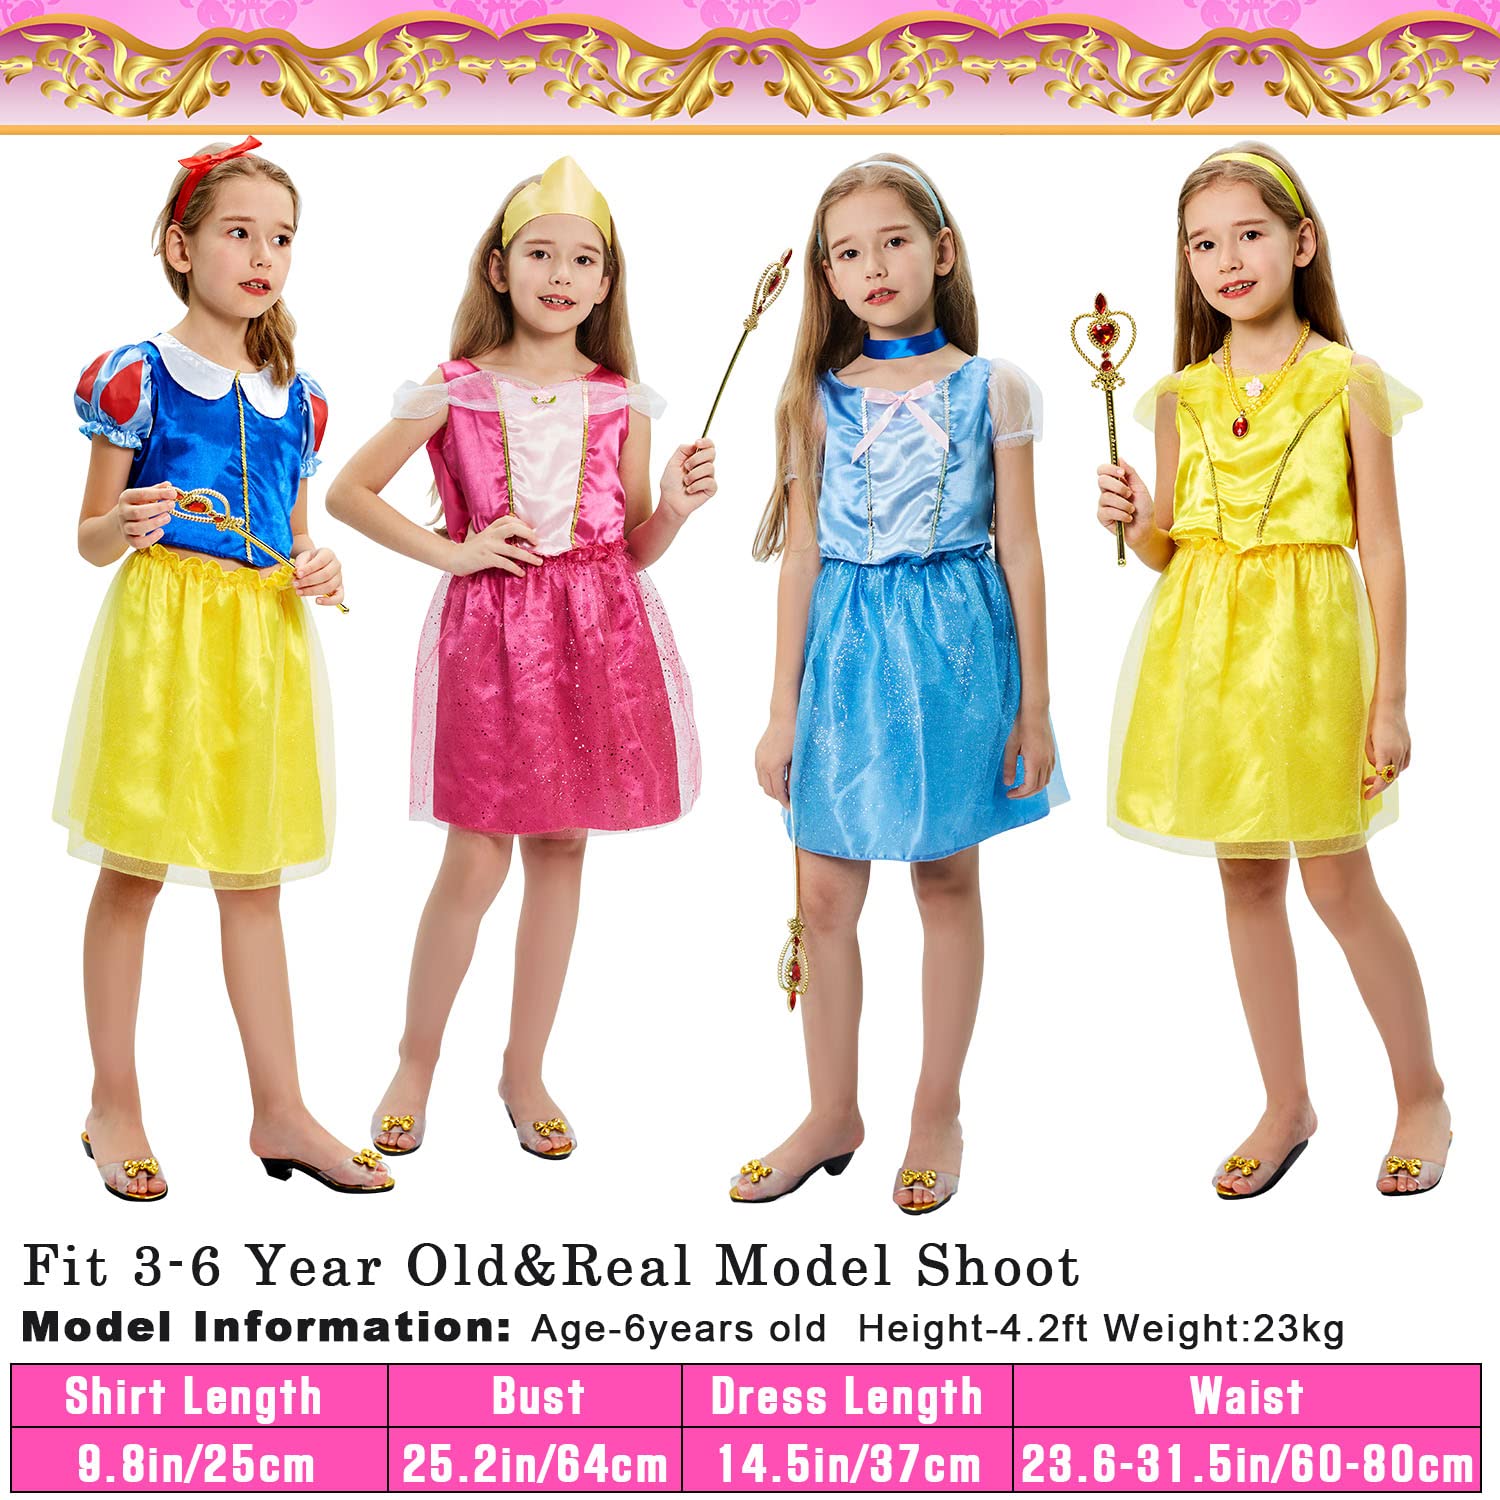 Latocos 17 Pcs Girls Princess Dress Up Trunk Role Play Cosplay Set with Princess Shoes Crown Accessories Princess Costume for Kids Age 3-6 Years